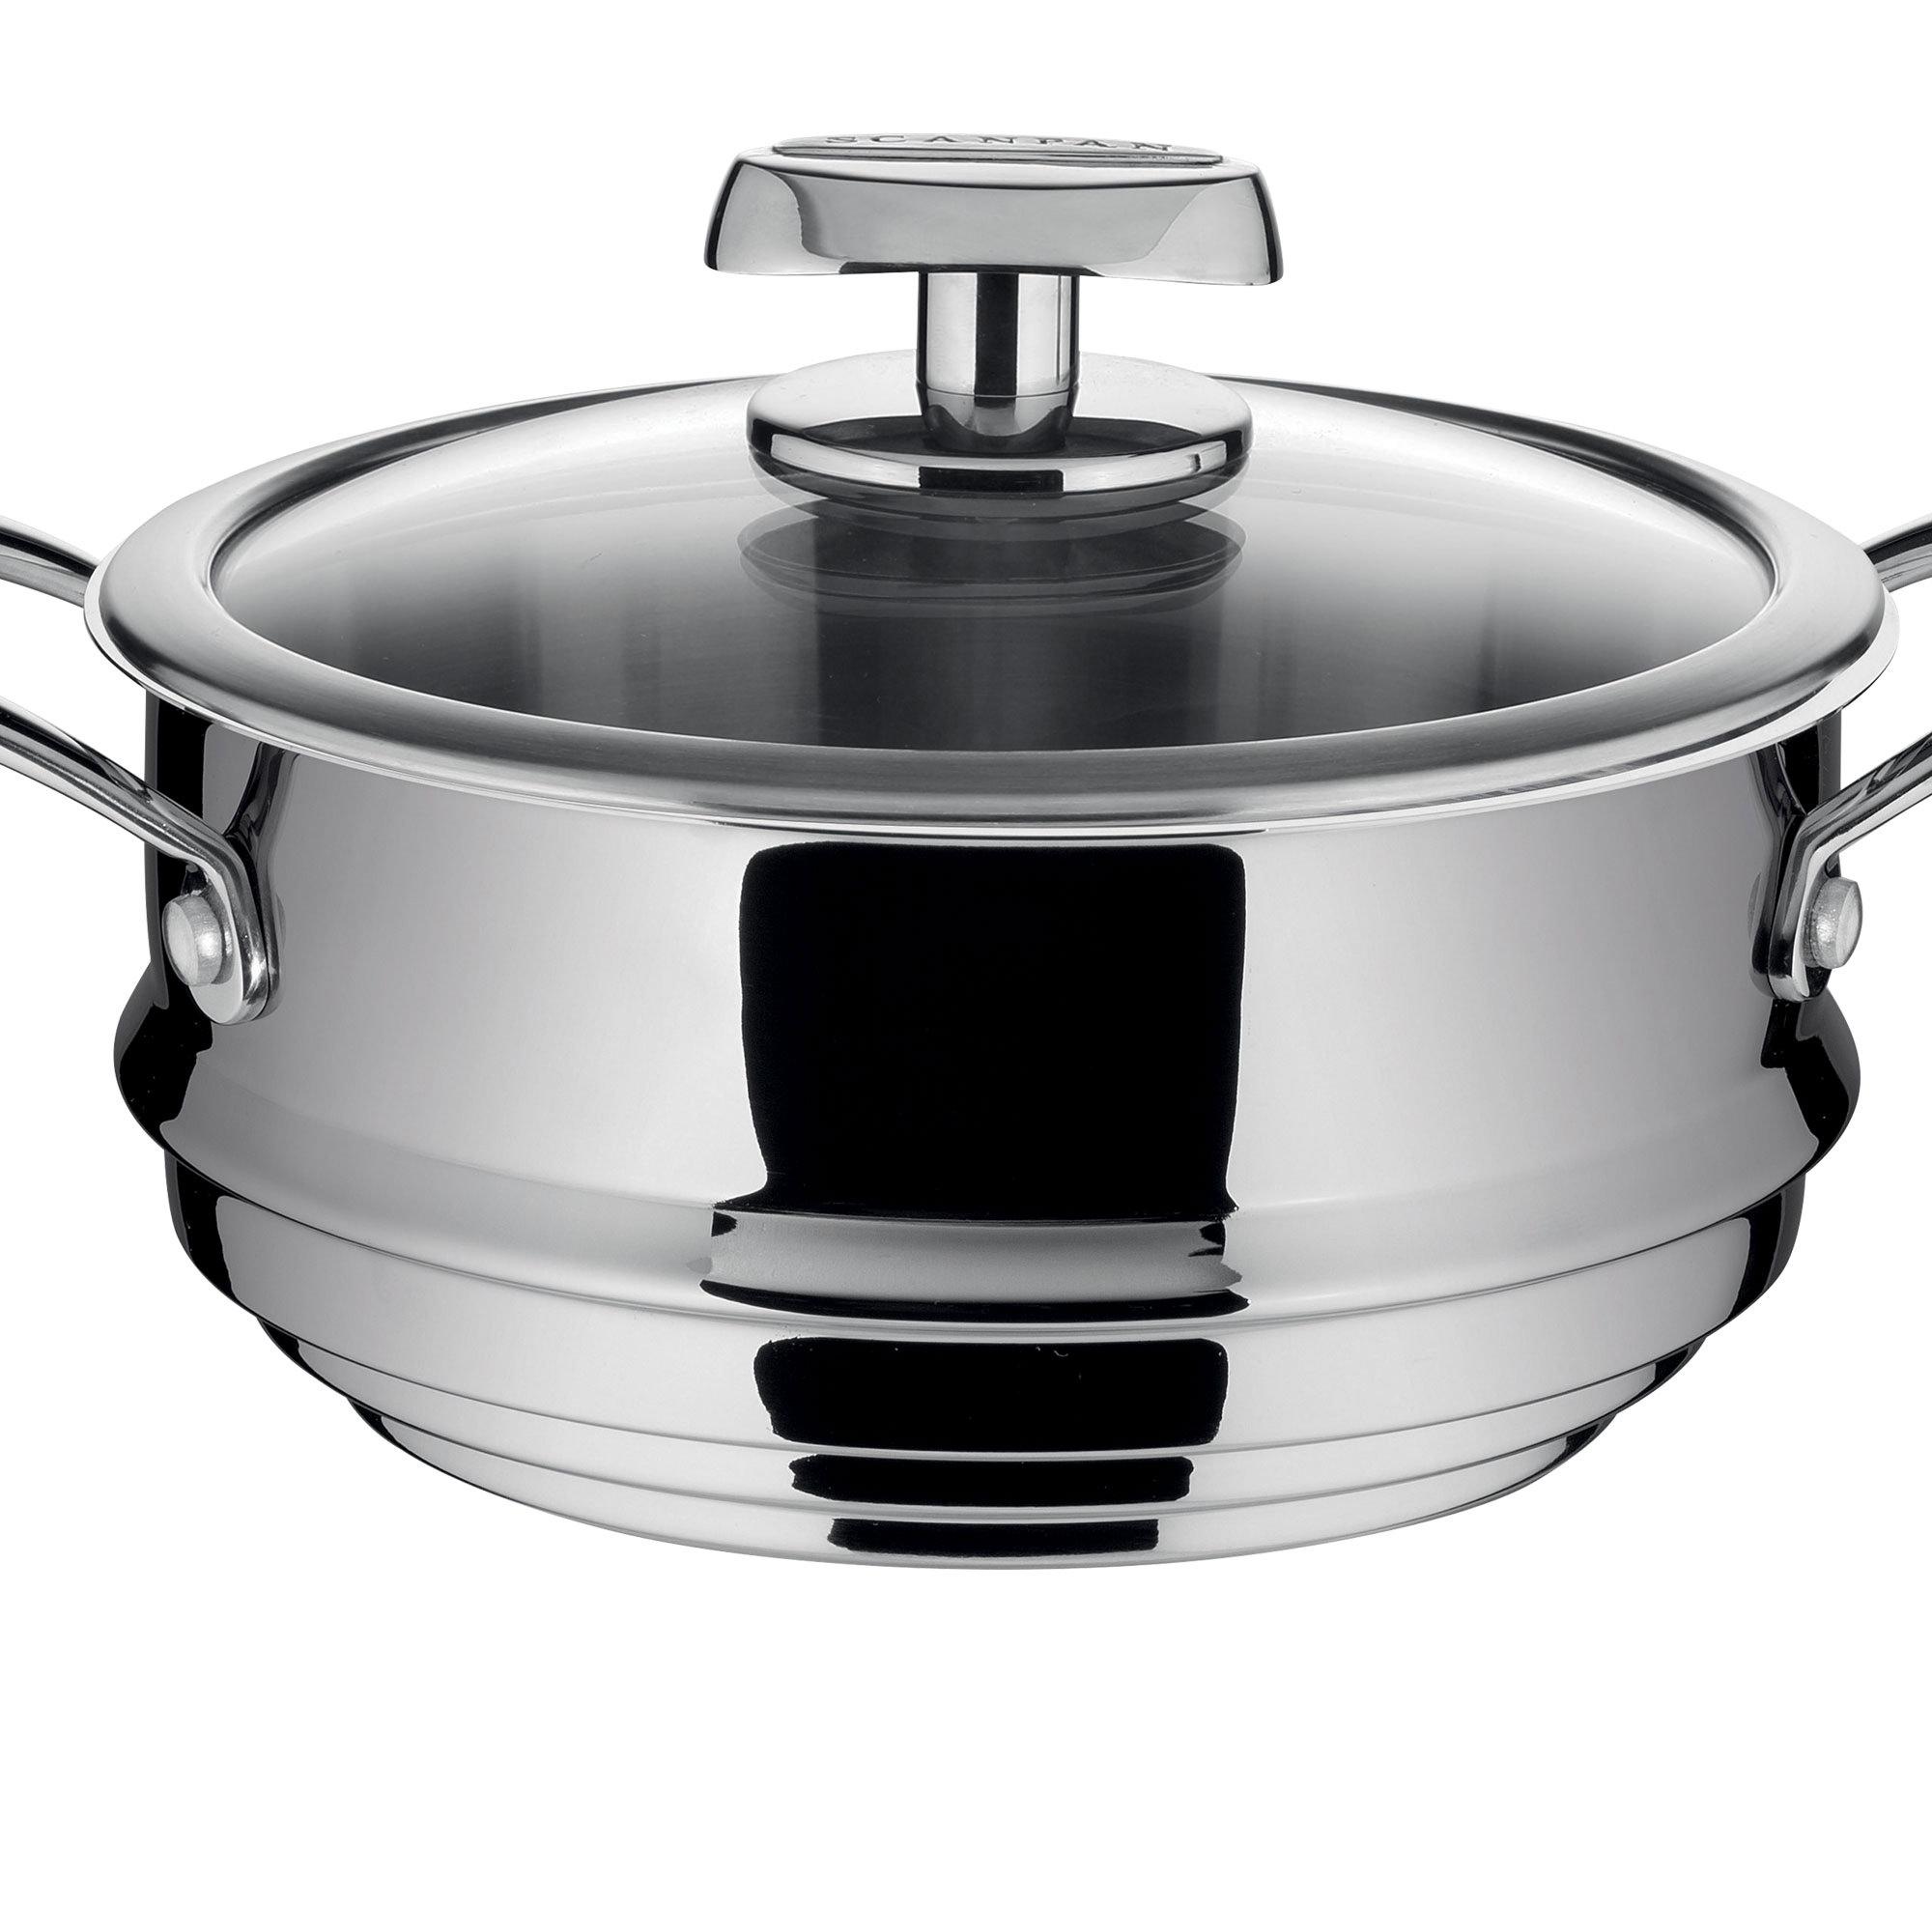 Scanpan Axis Multi Steamer Insert with Lid Image 4